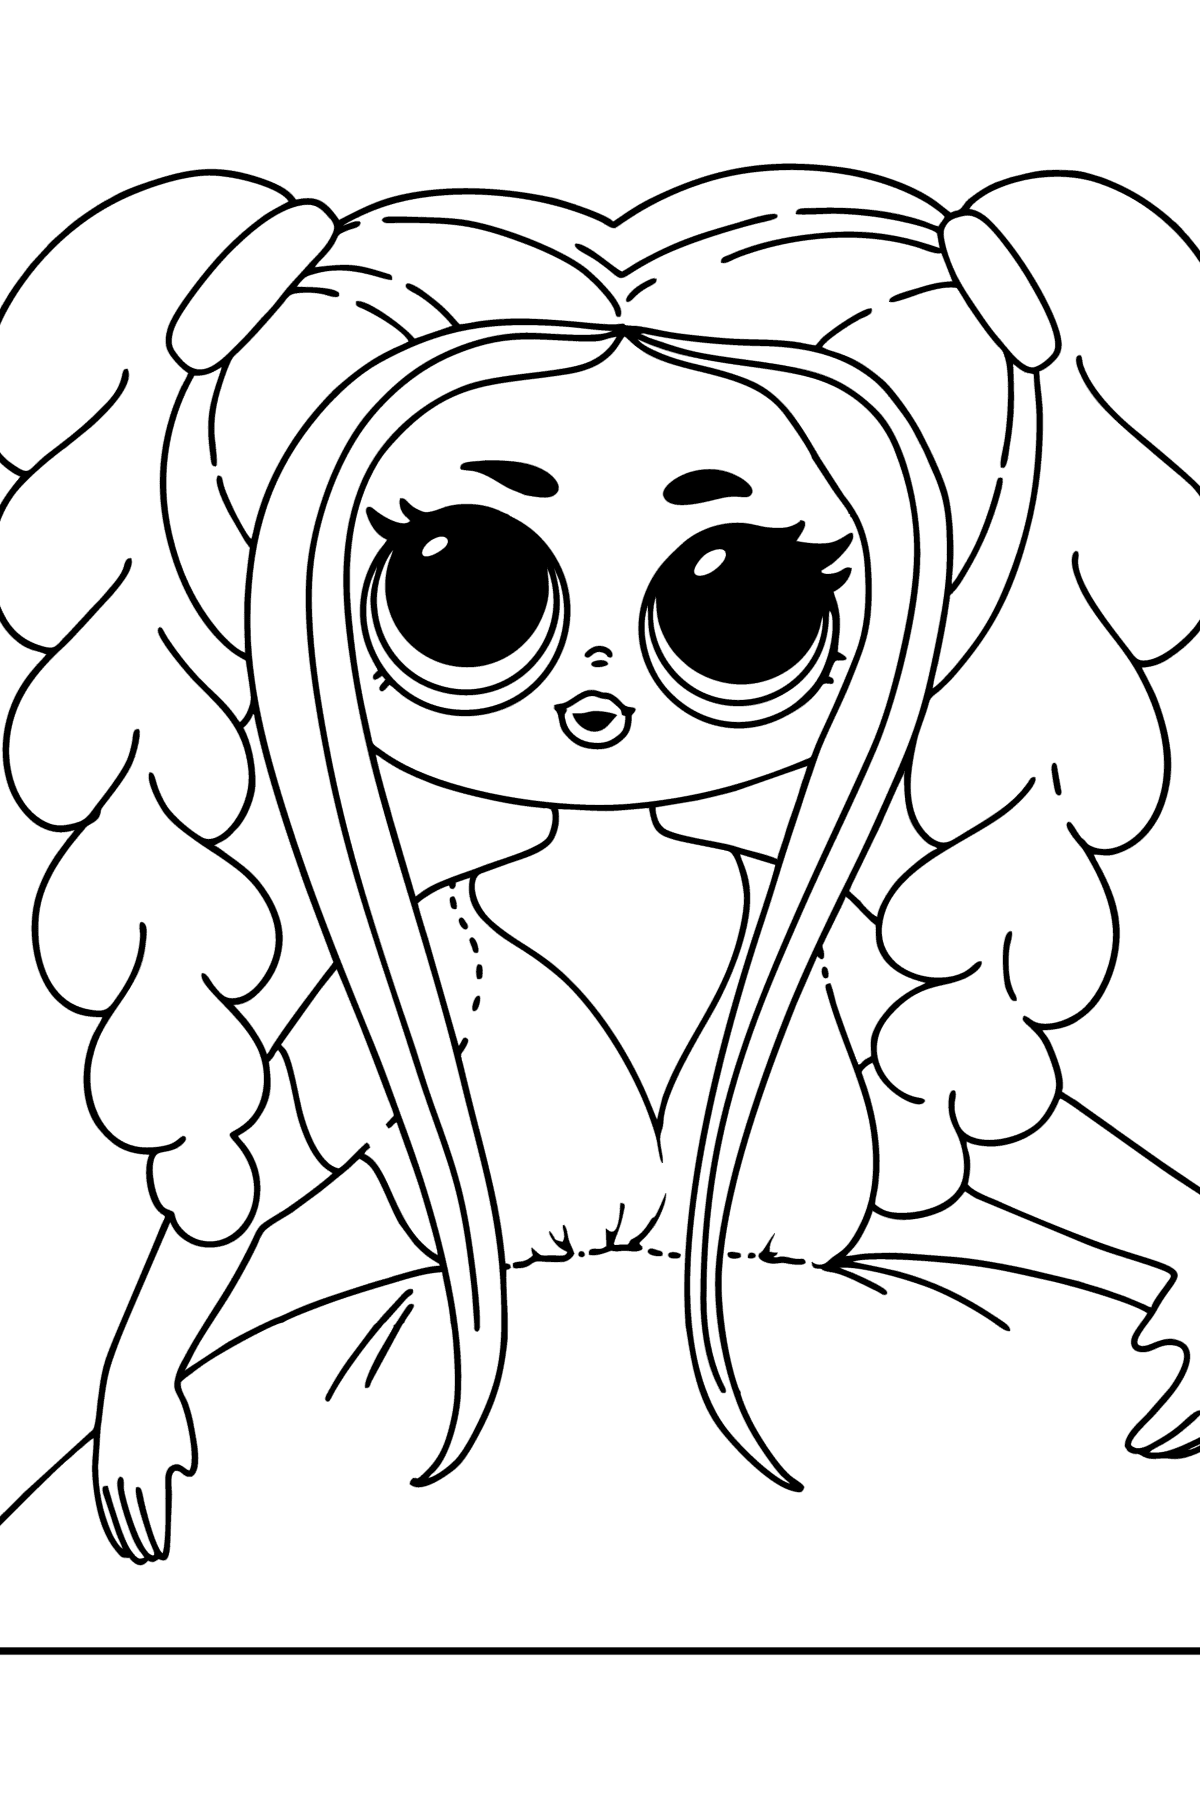 Coloring page LOL OMG Honeylicious Doll - Coloring Pages for Kids